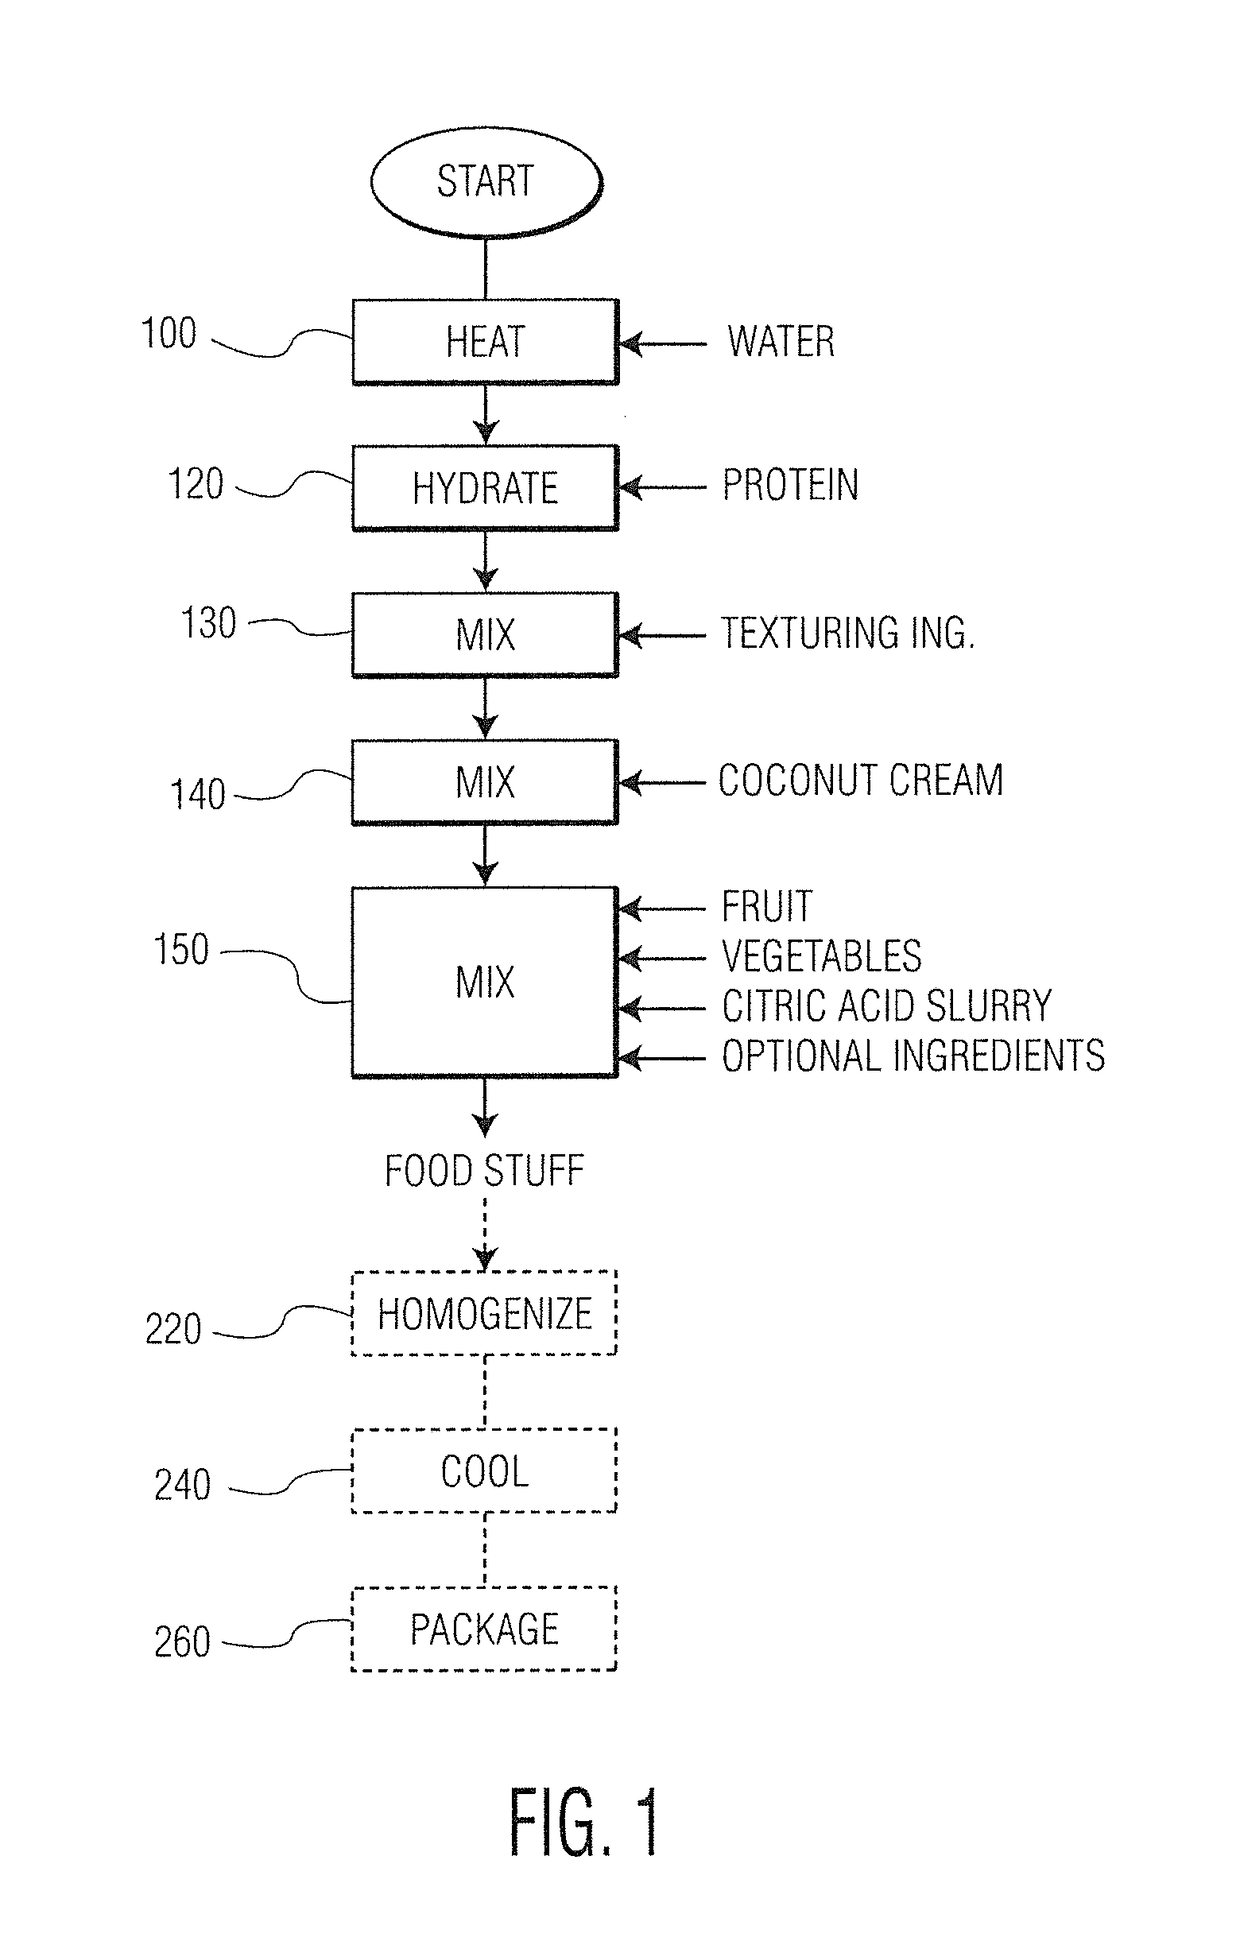 Compositions and processes for producing yogurt-like foodstuffs without use of dairy products